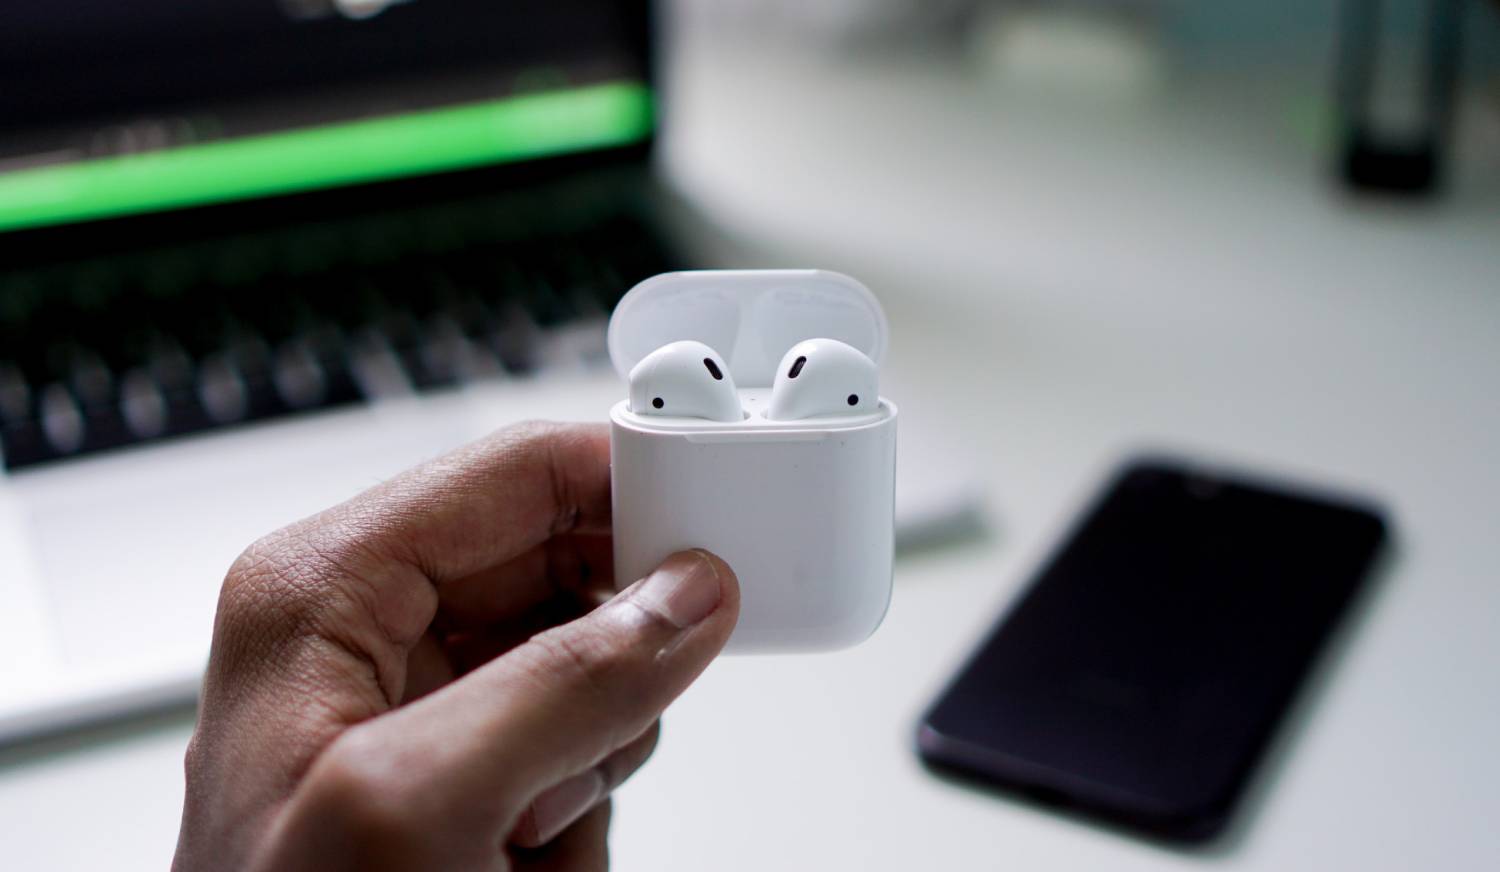 How to connect AirPods to your iPhone or Android device